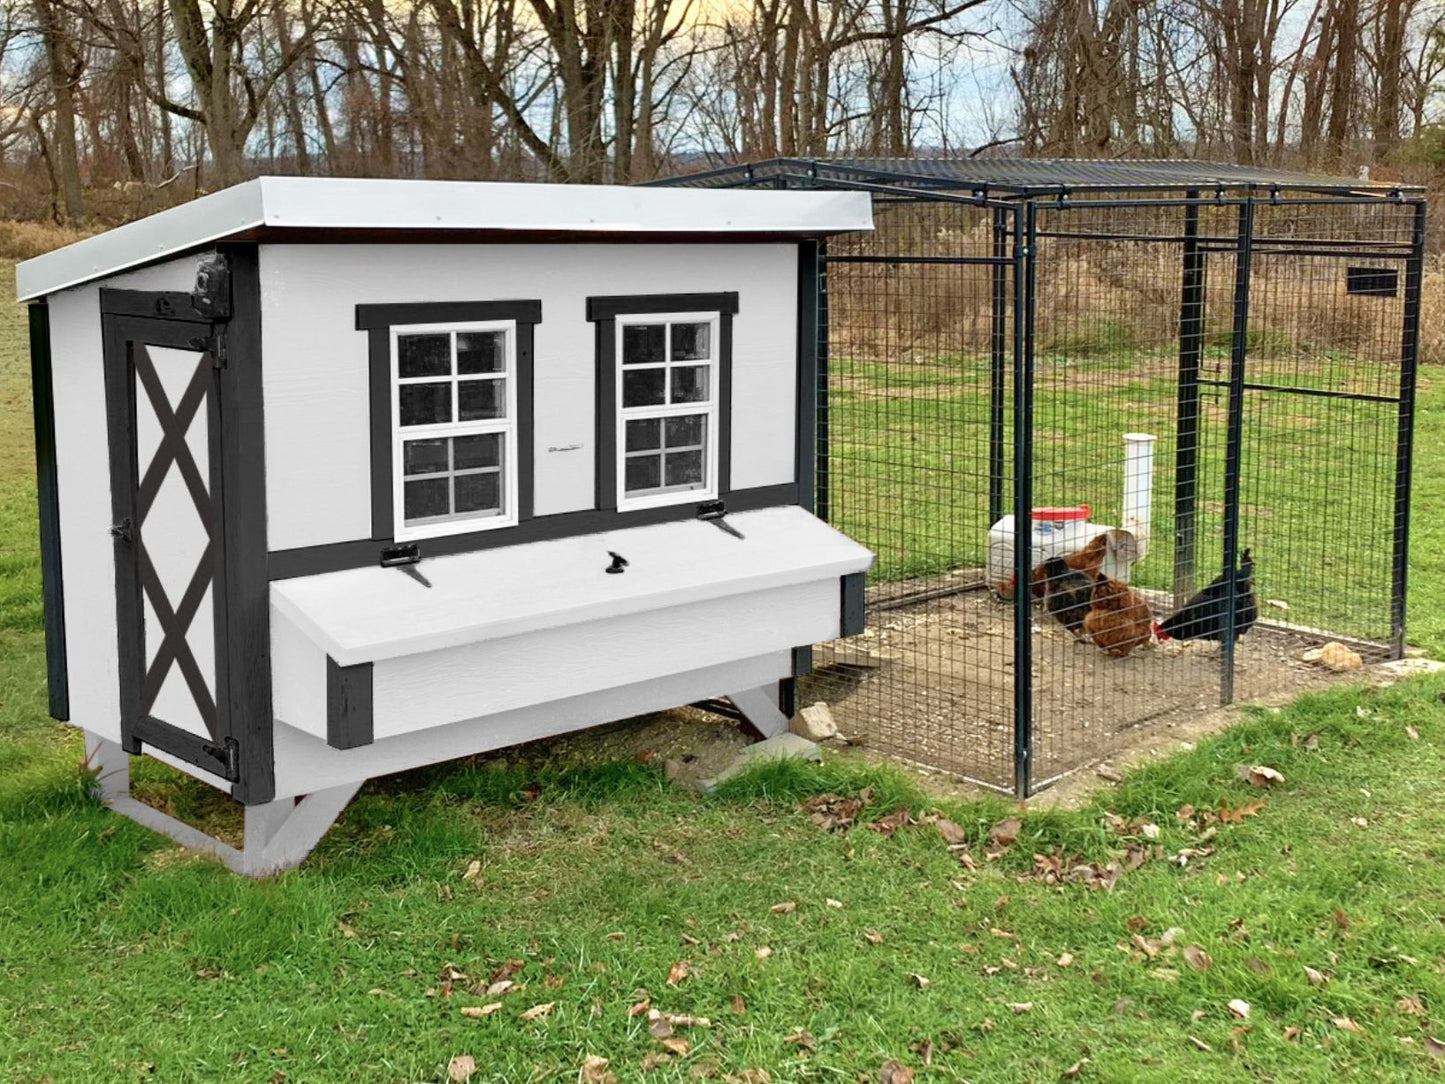 White Farmhouse OverEZ Chicken Coop with attached run